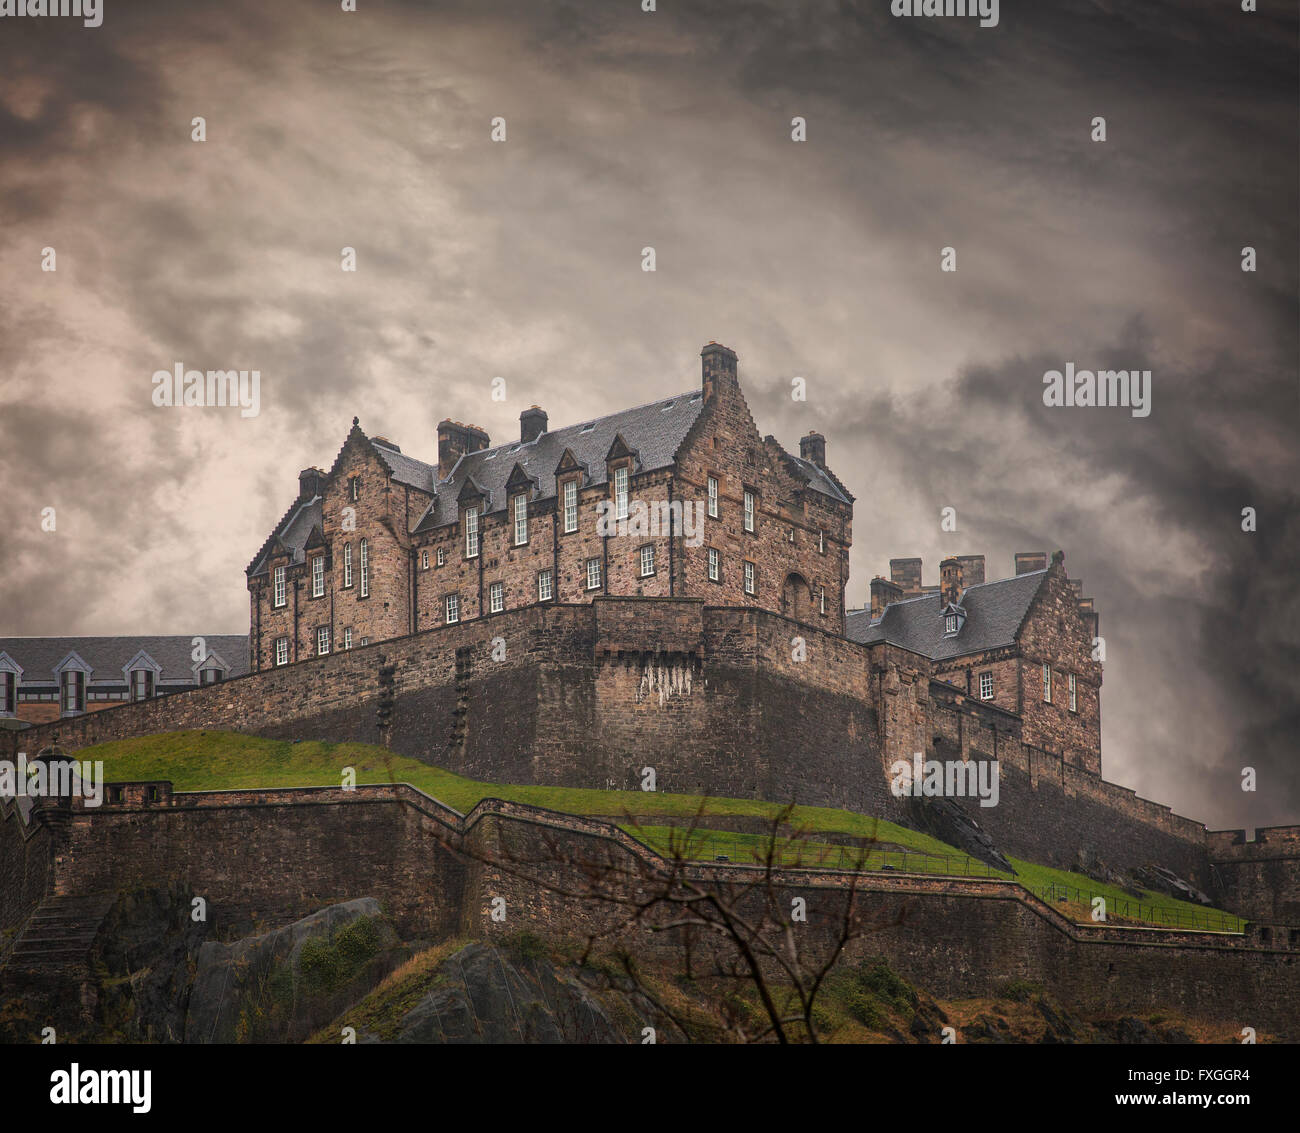 Image of the Edinburgh rock and its medieval castle. Some noise. Stock Photo